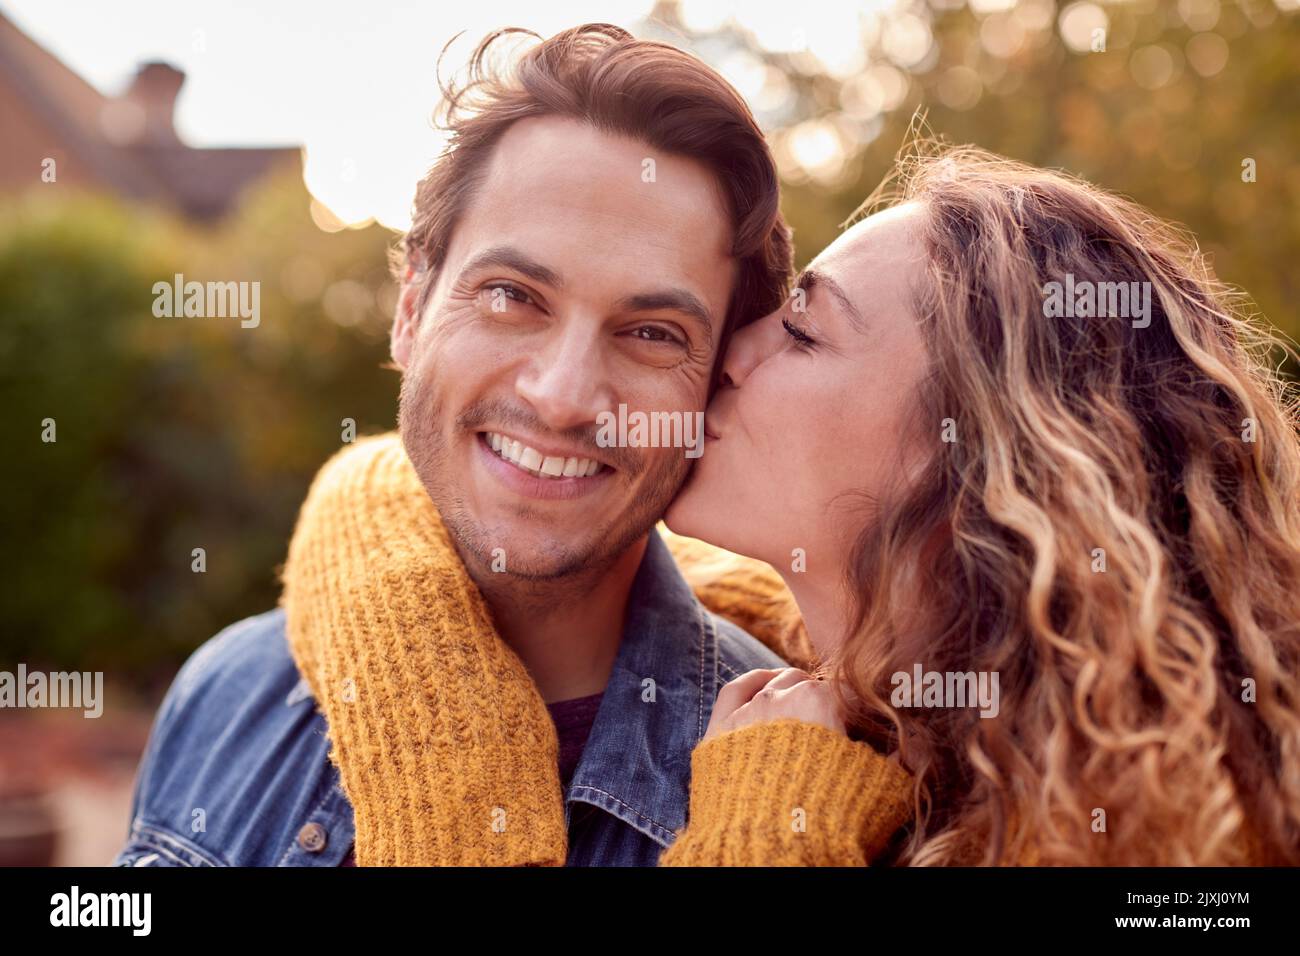 Portrait Of Happy Loving Couple With Woman Giving Man Kiss On The Cheek Stock Photo